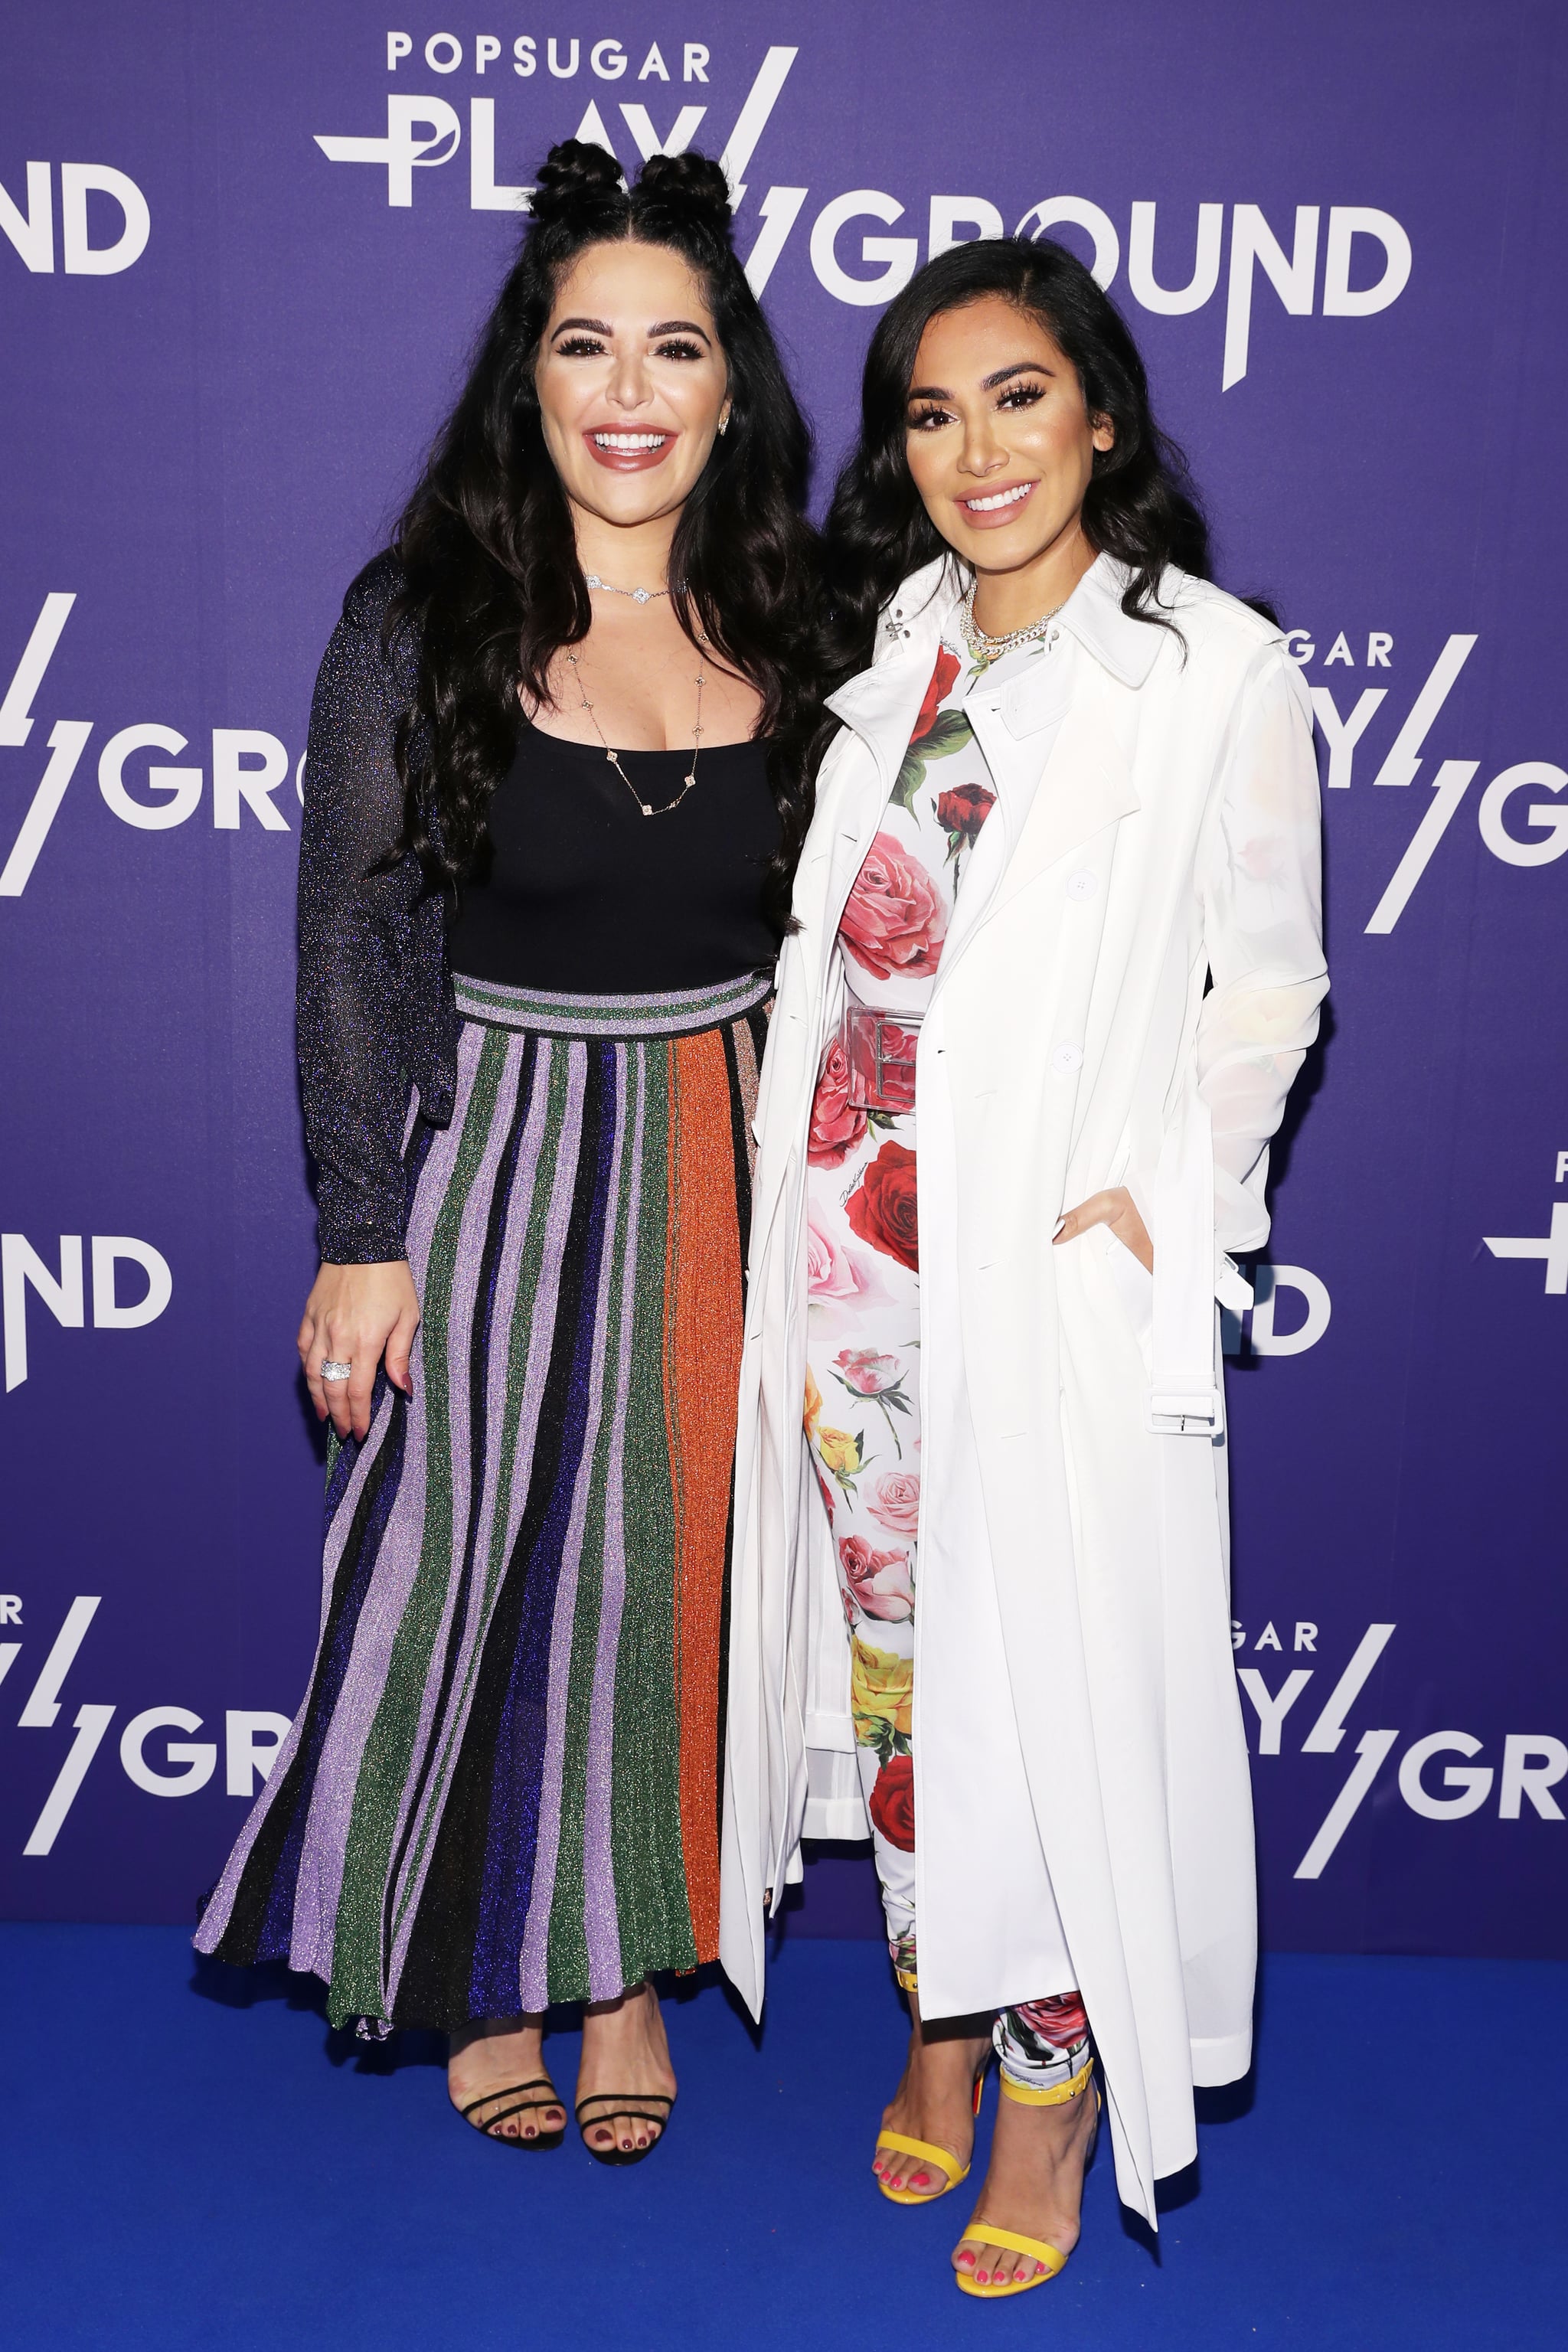 NEW YORK, NY - JUNE 10:  Makeup artists Mona Kattan (L) and Huda Kattan attend day 2 of POPSUGAR Play/Ground on June 10, 2018 in New York City.  (Photo by Cindy Ord/Getty Images for POPSUGAR Play/Ground)